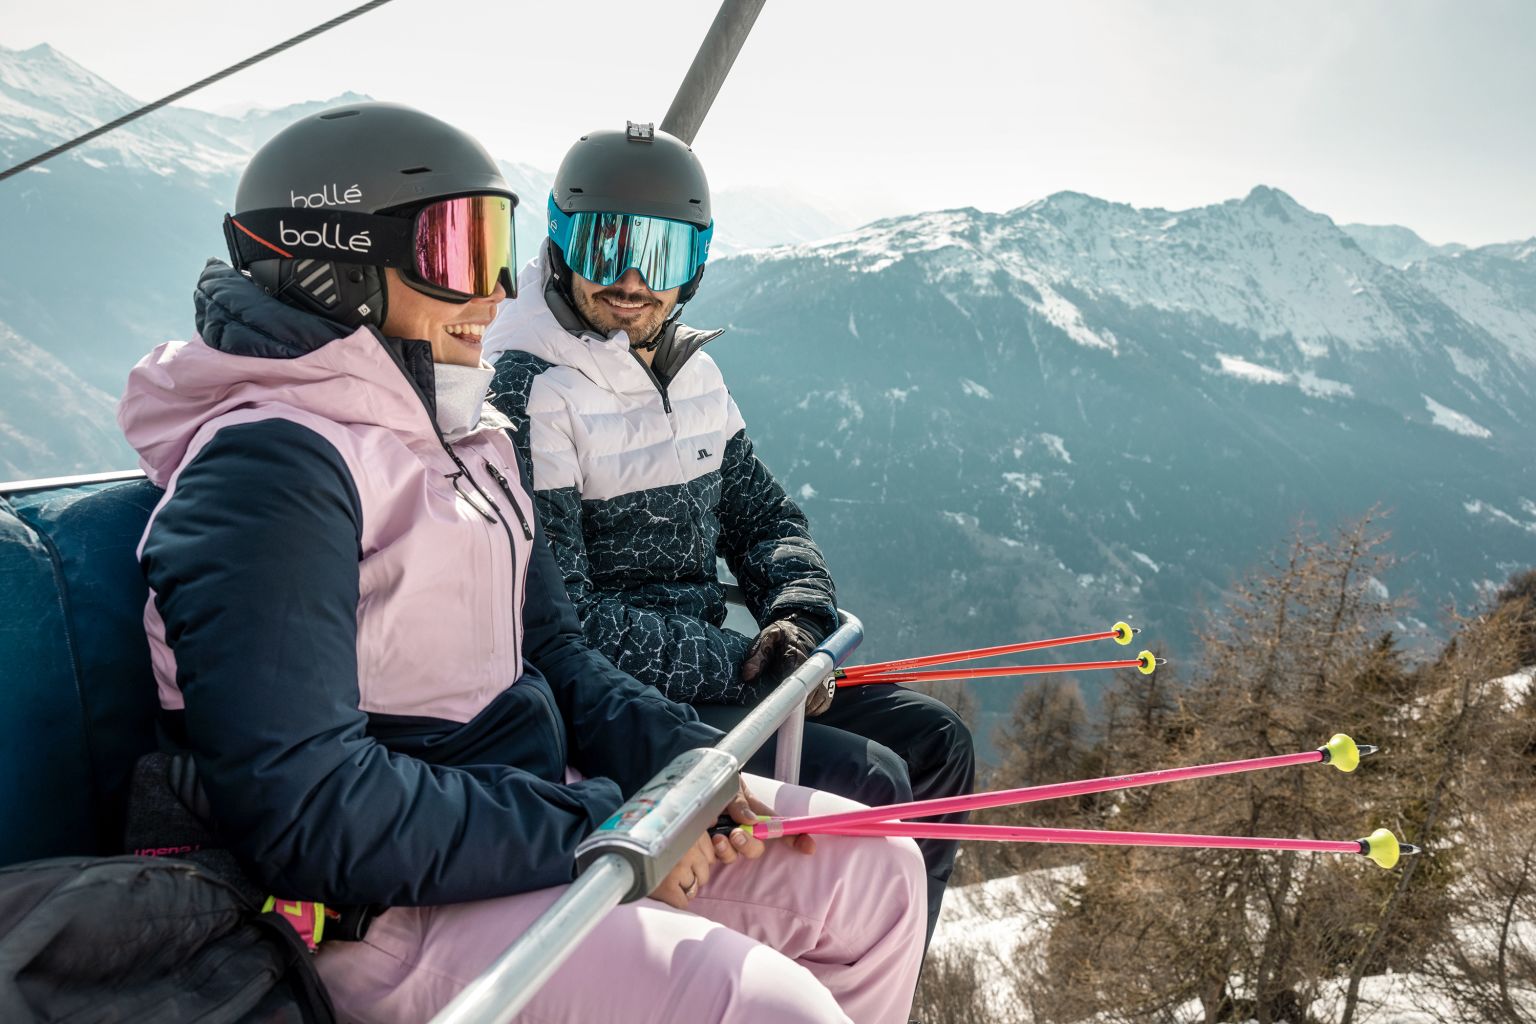 Loic and Mélanie Meillard talking on a chairlift in Thyon, Valais.